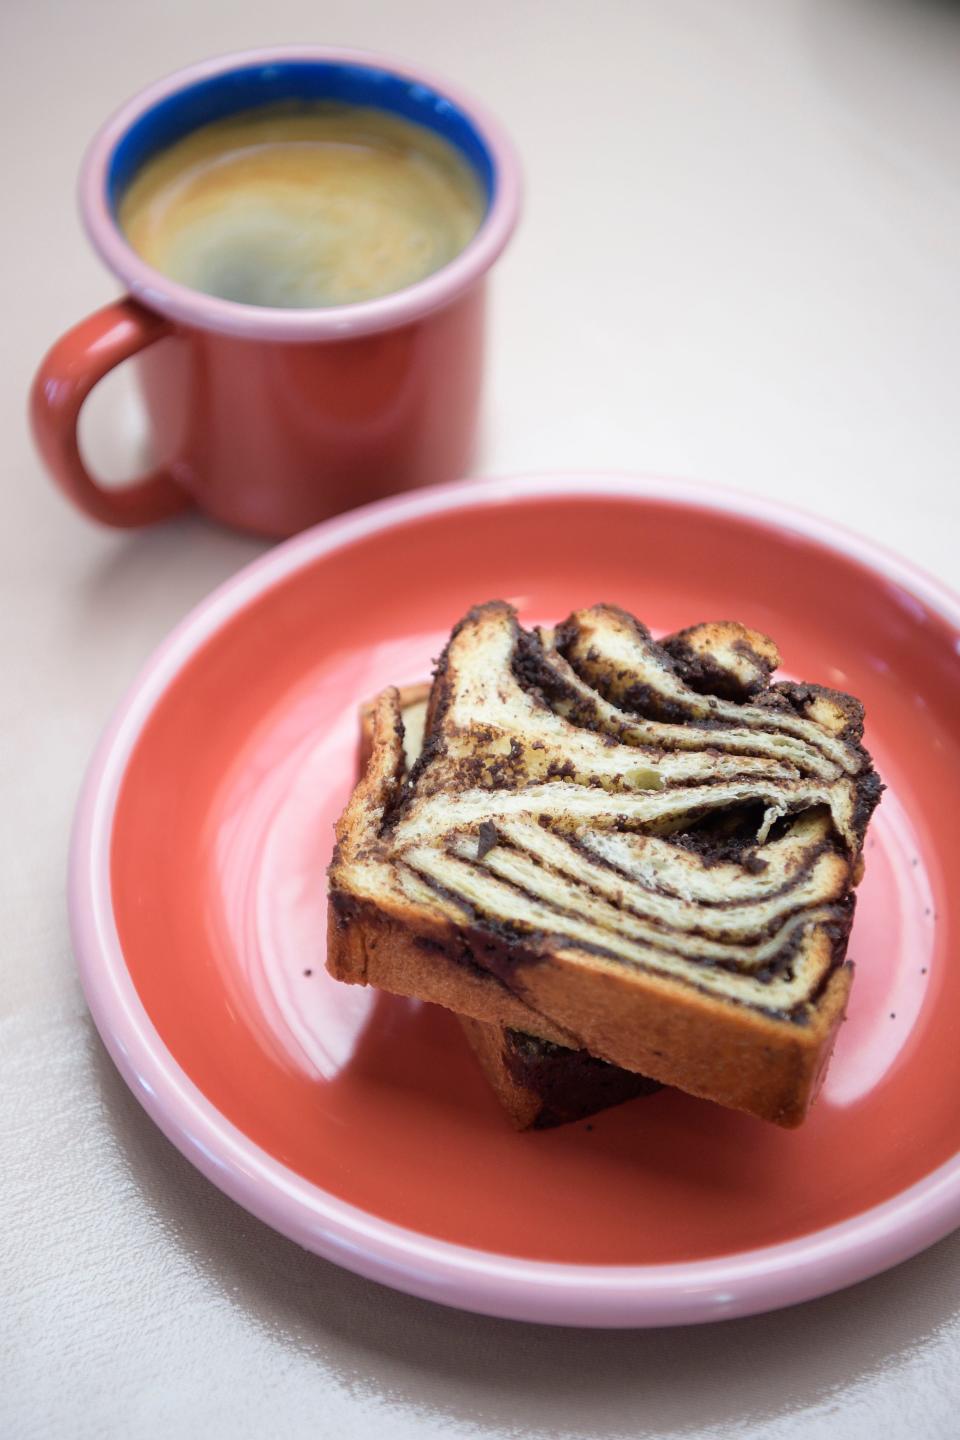 Chocolate is one of the multiple babka flavors offered at Potchke in downtown Knoxville. Southern Living named the New-York-style Jewish deli with a Floridian twist as one of the South's best new restaurants of 2023.